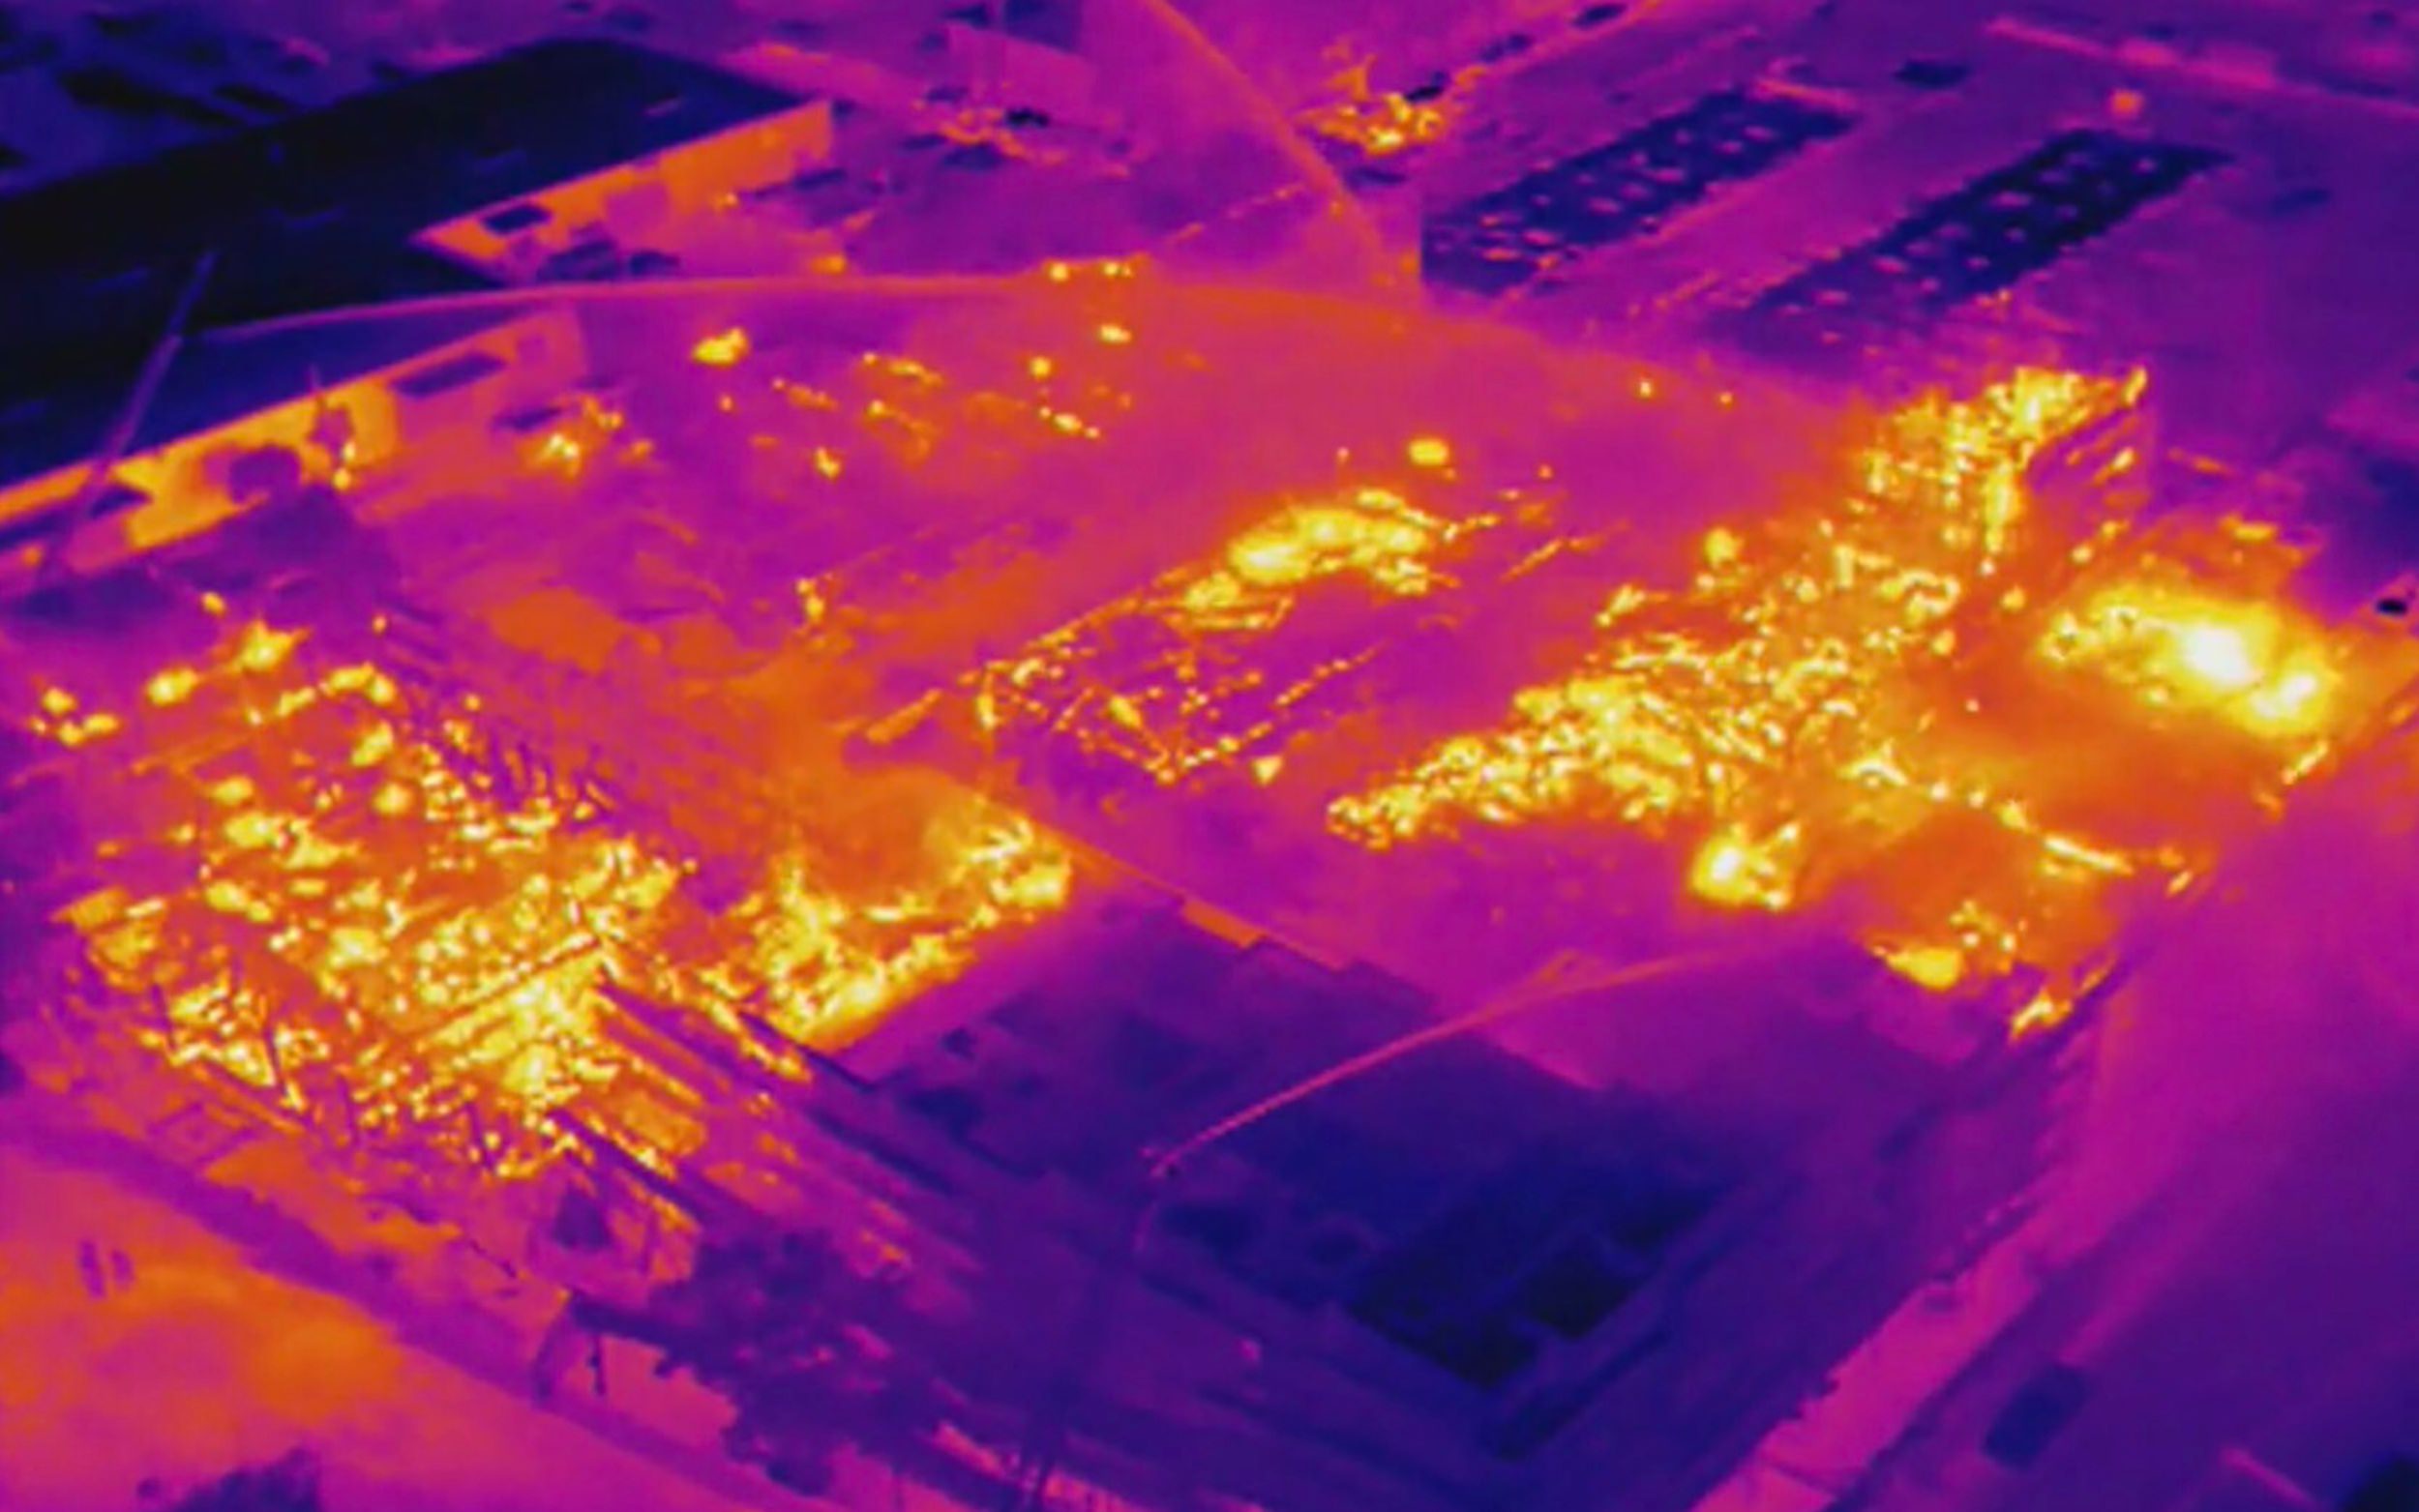 Drone with thermal camera shows hot spots in massive fire in Oakland, Calif